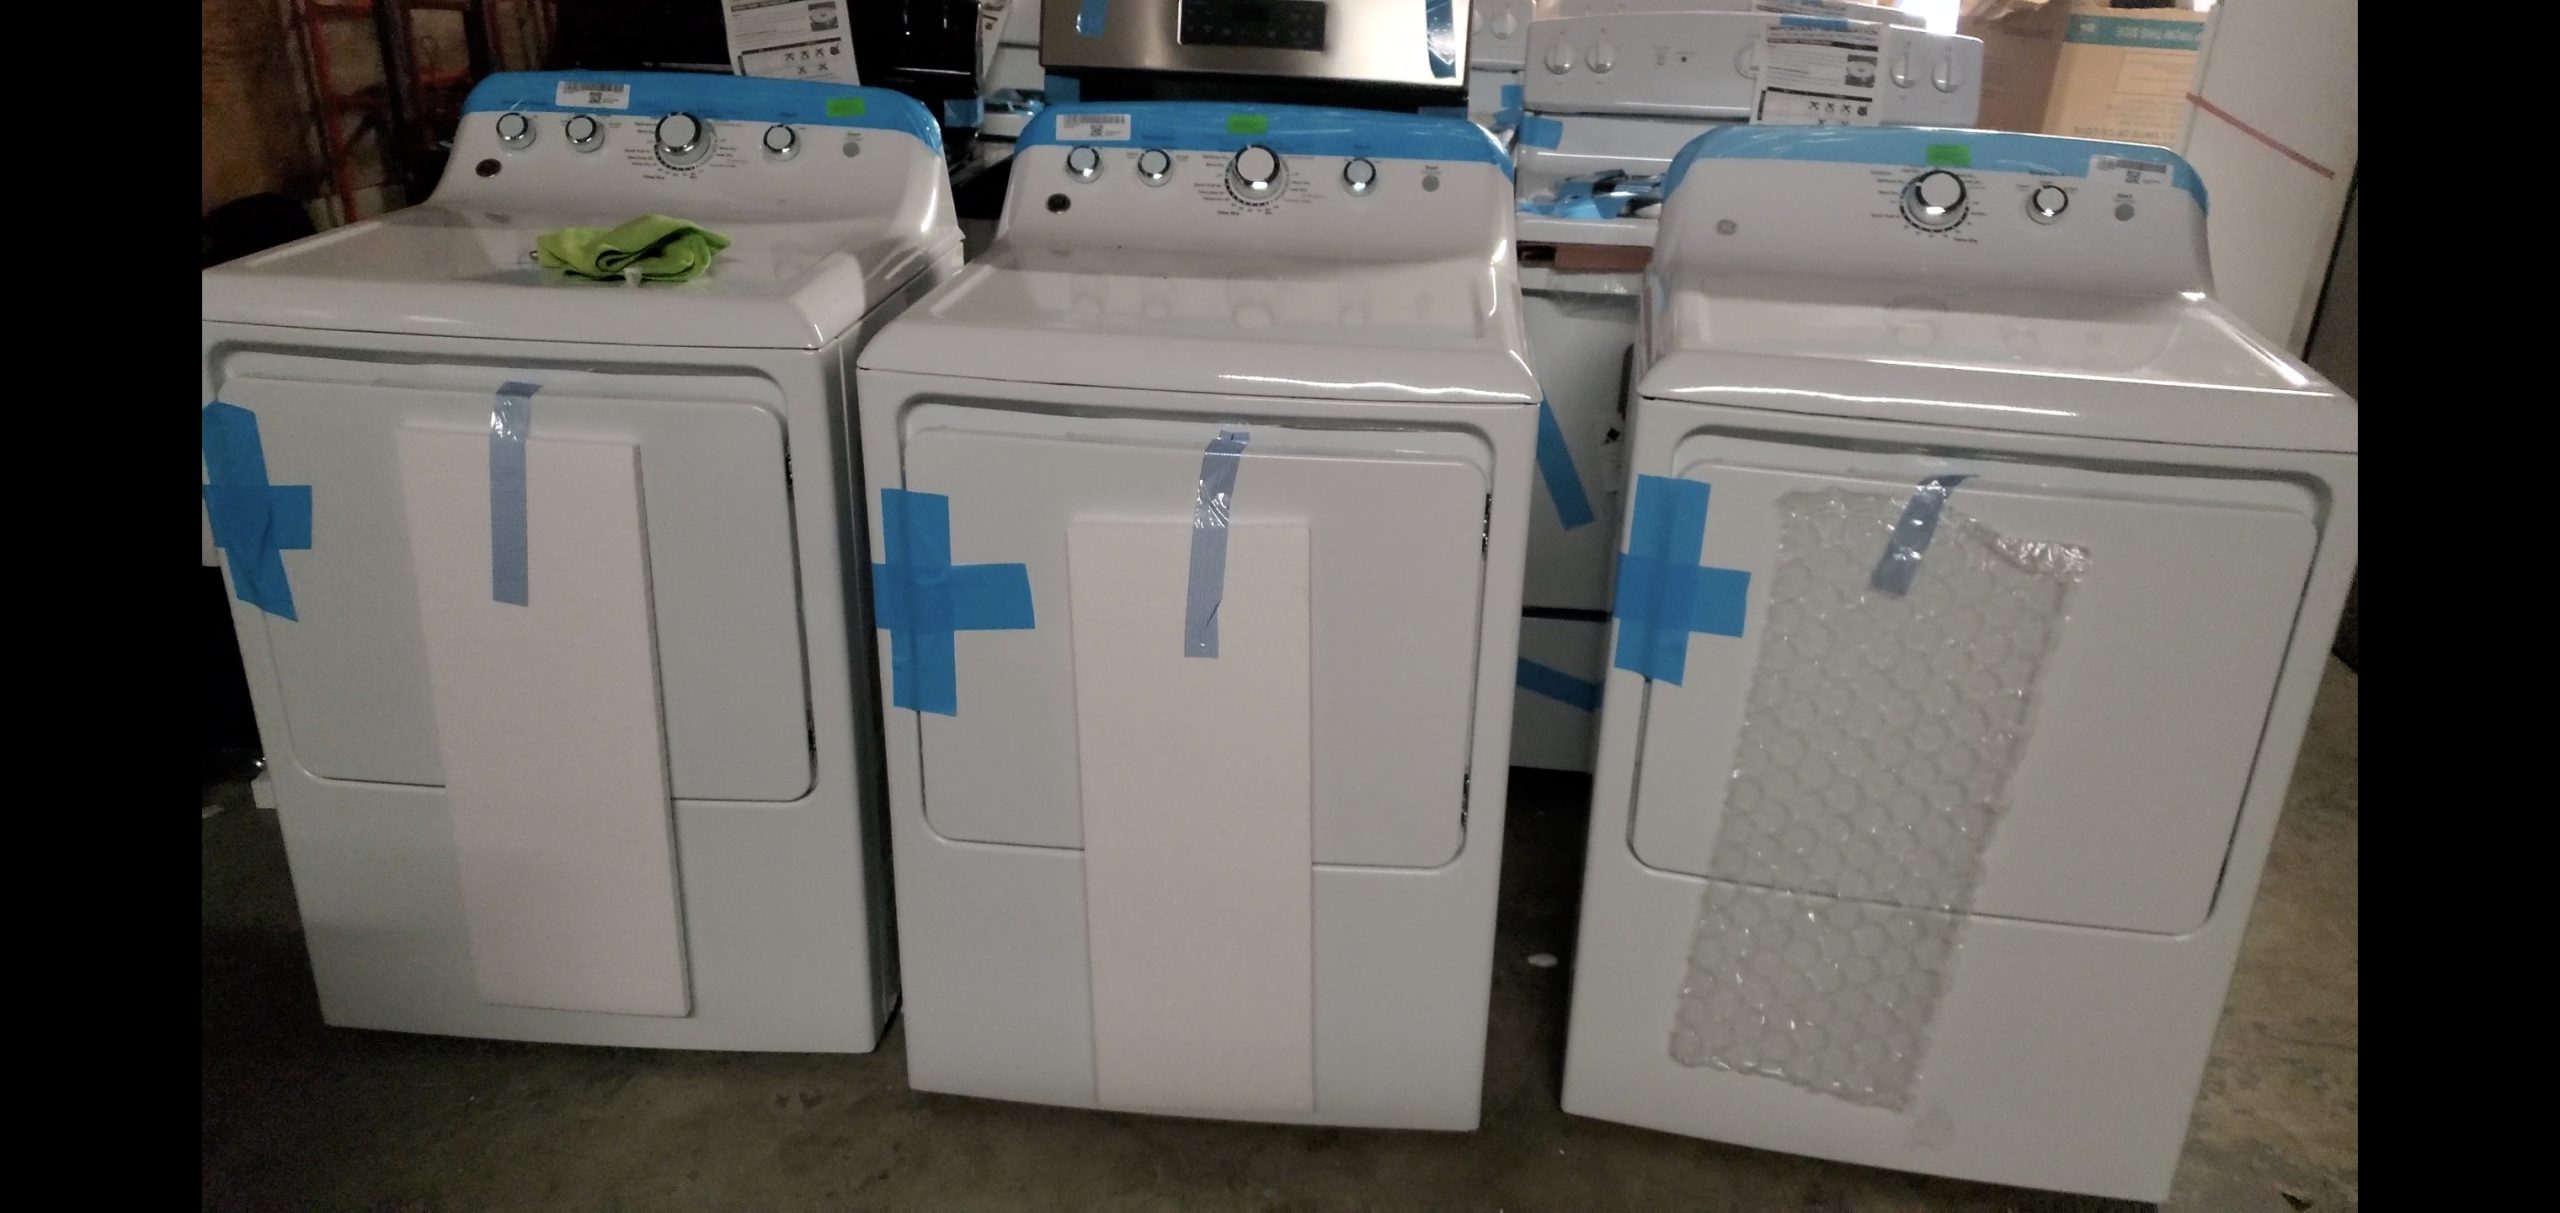 example of Liquidation GE scratch and dent electric dryers by the truckload.